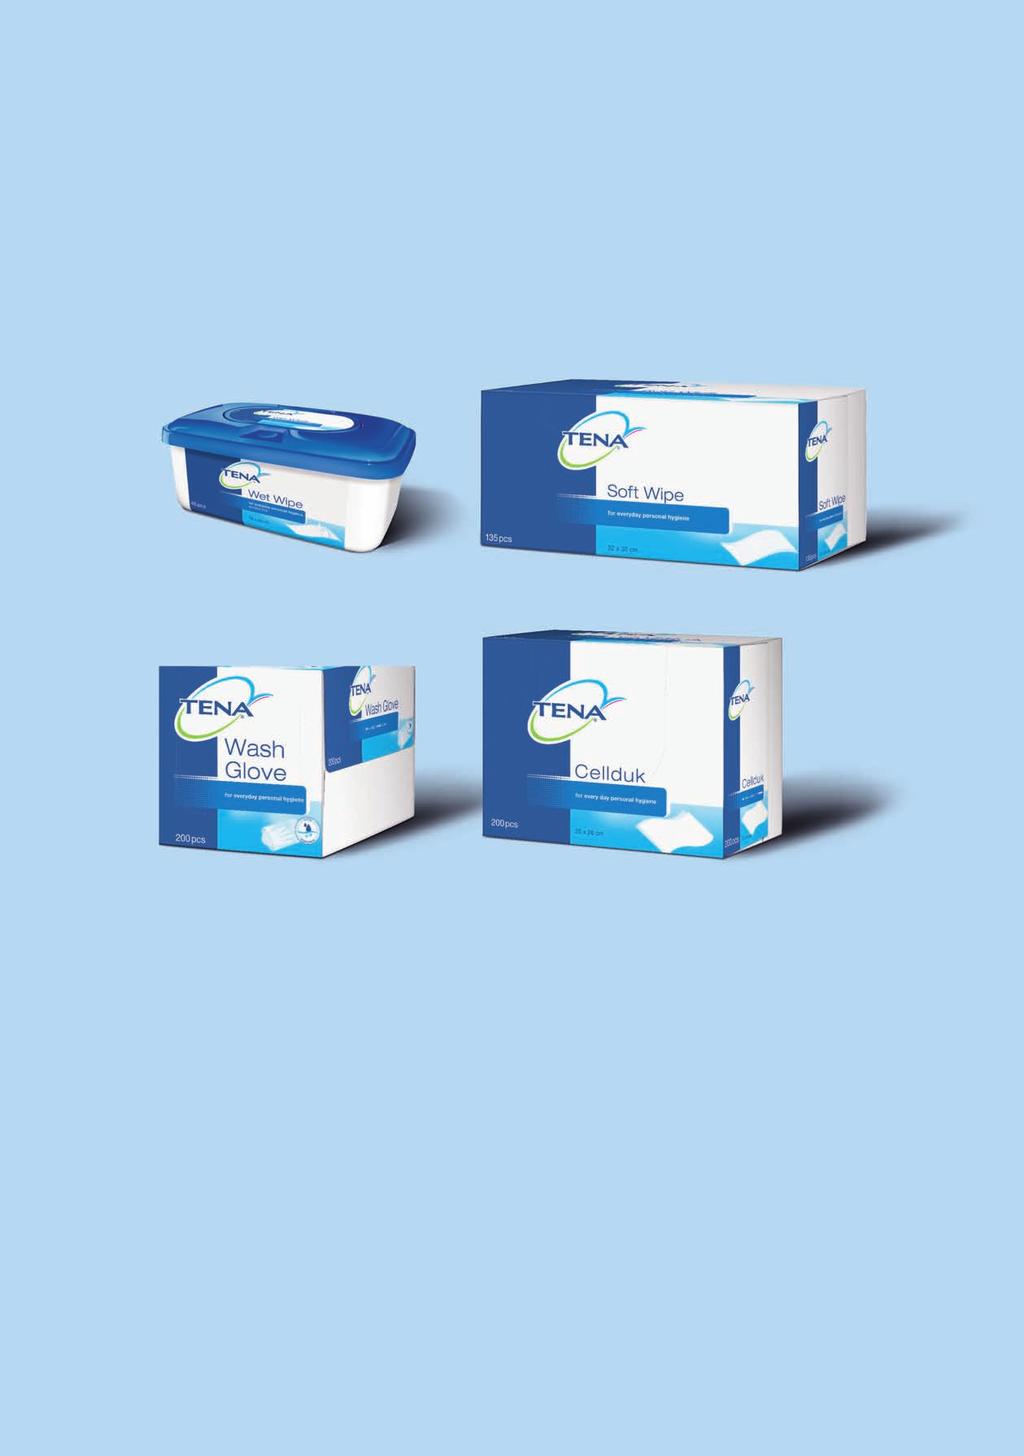 TENA Wet Wipe Pre-moistened soft wipes for easy and convenient personal cleansing and skin conditioning. Alcohol-free, non-stinging formulation, suitable for frequent use and incontinence care.